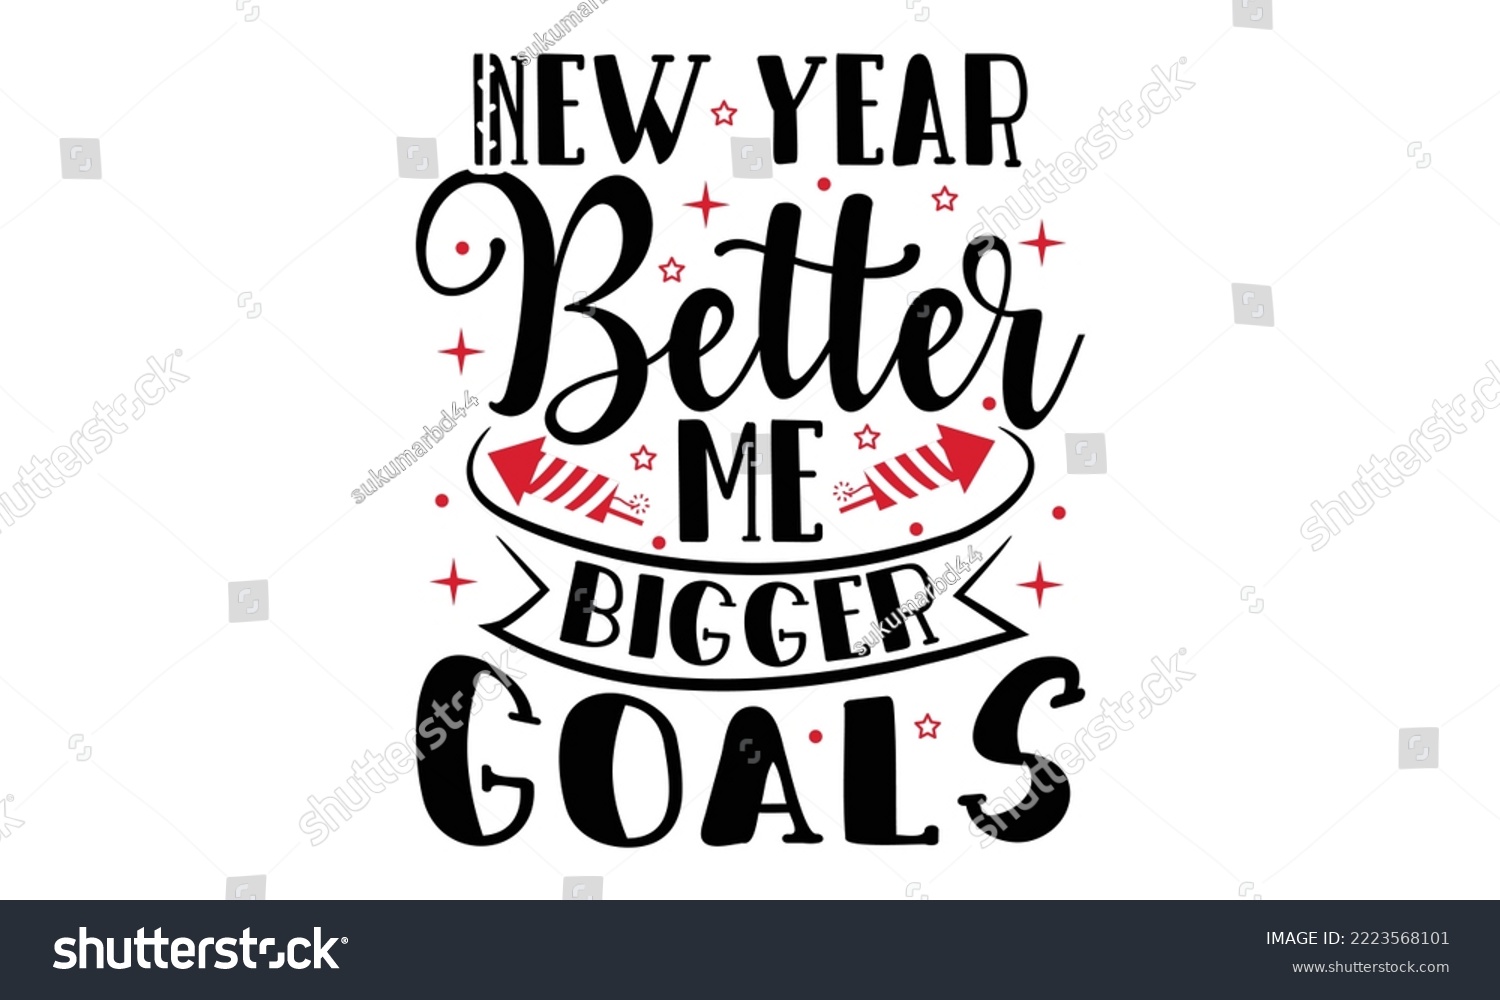 SVG of New Year Better Me Bigger Goals - Happy New Year SVG Design, Hand drawn lettering phrase isolated on white background, Calligraphy T-shirt design, EPS, SVG Files for Cutting, bag, cups, card svg